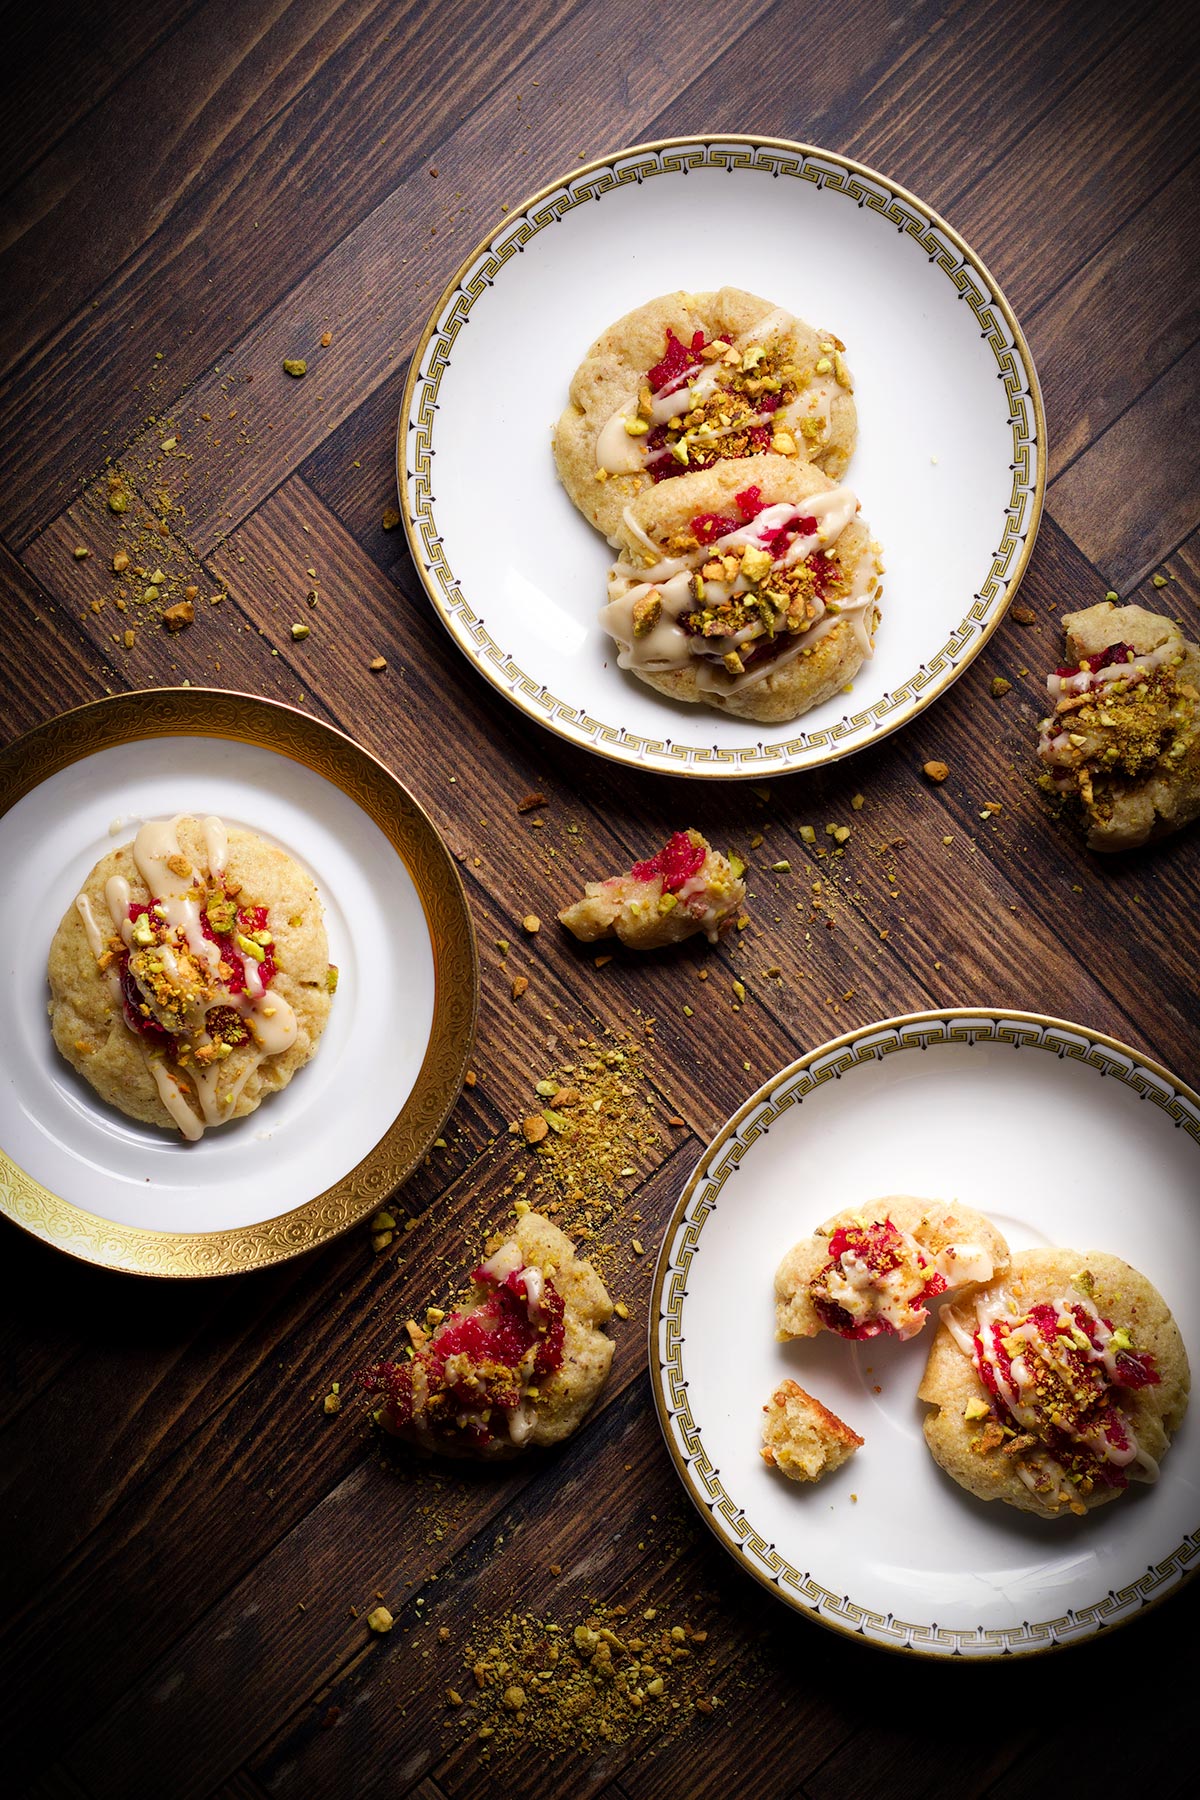 Three small plates containing cranberry pistachio cookies.